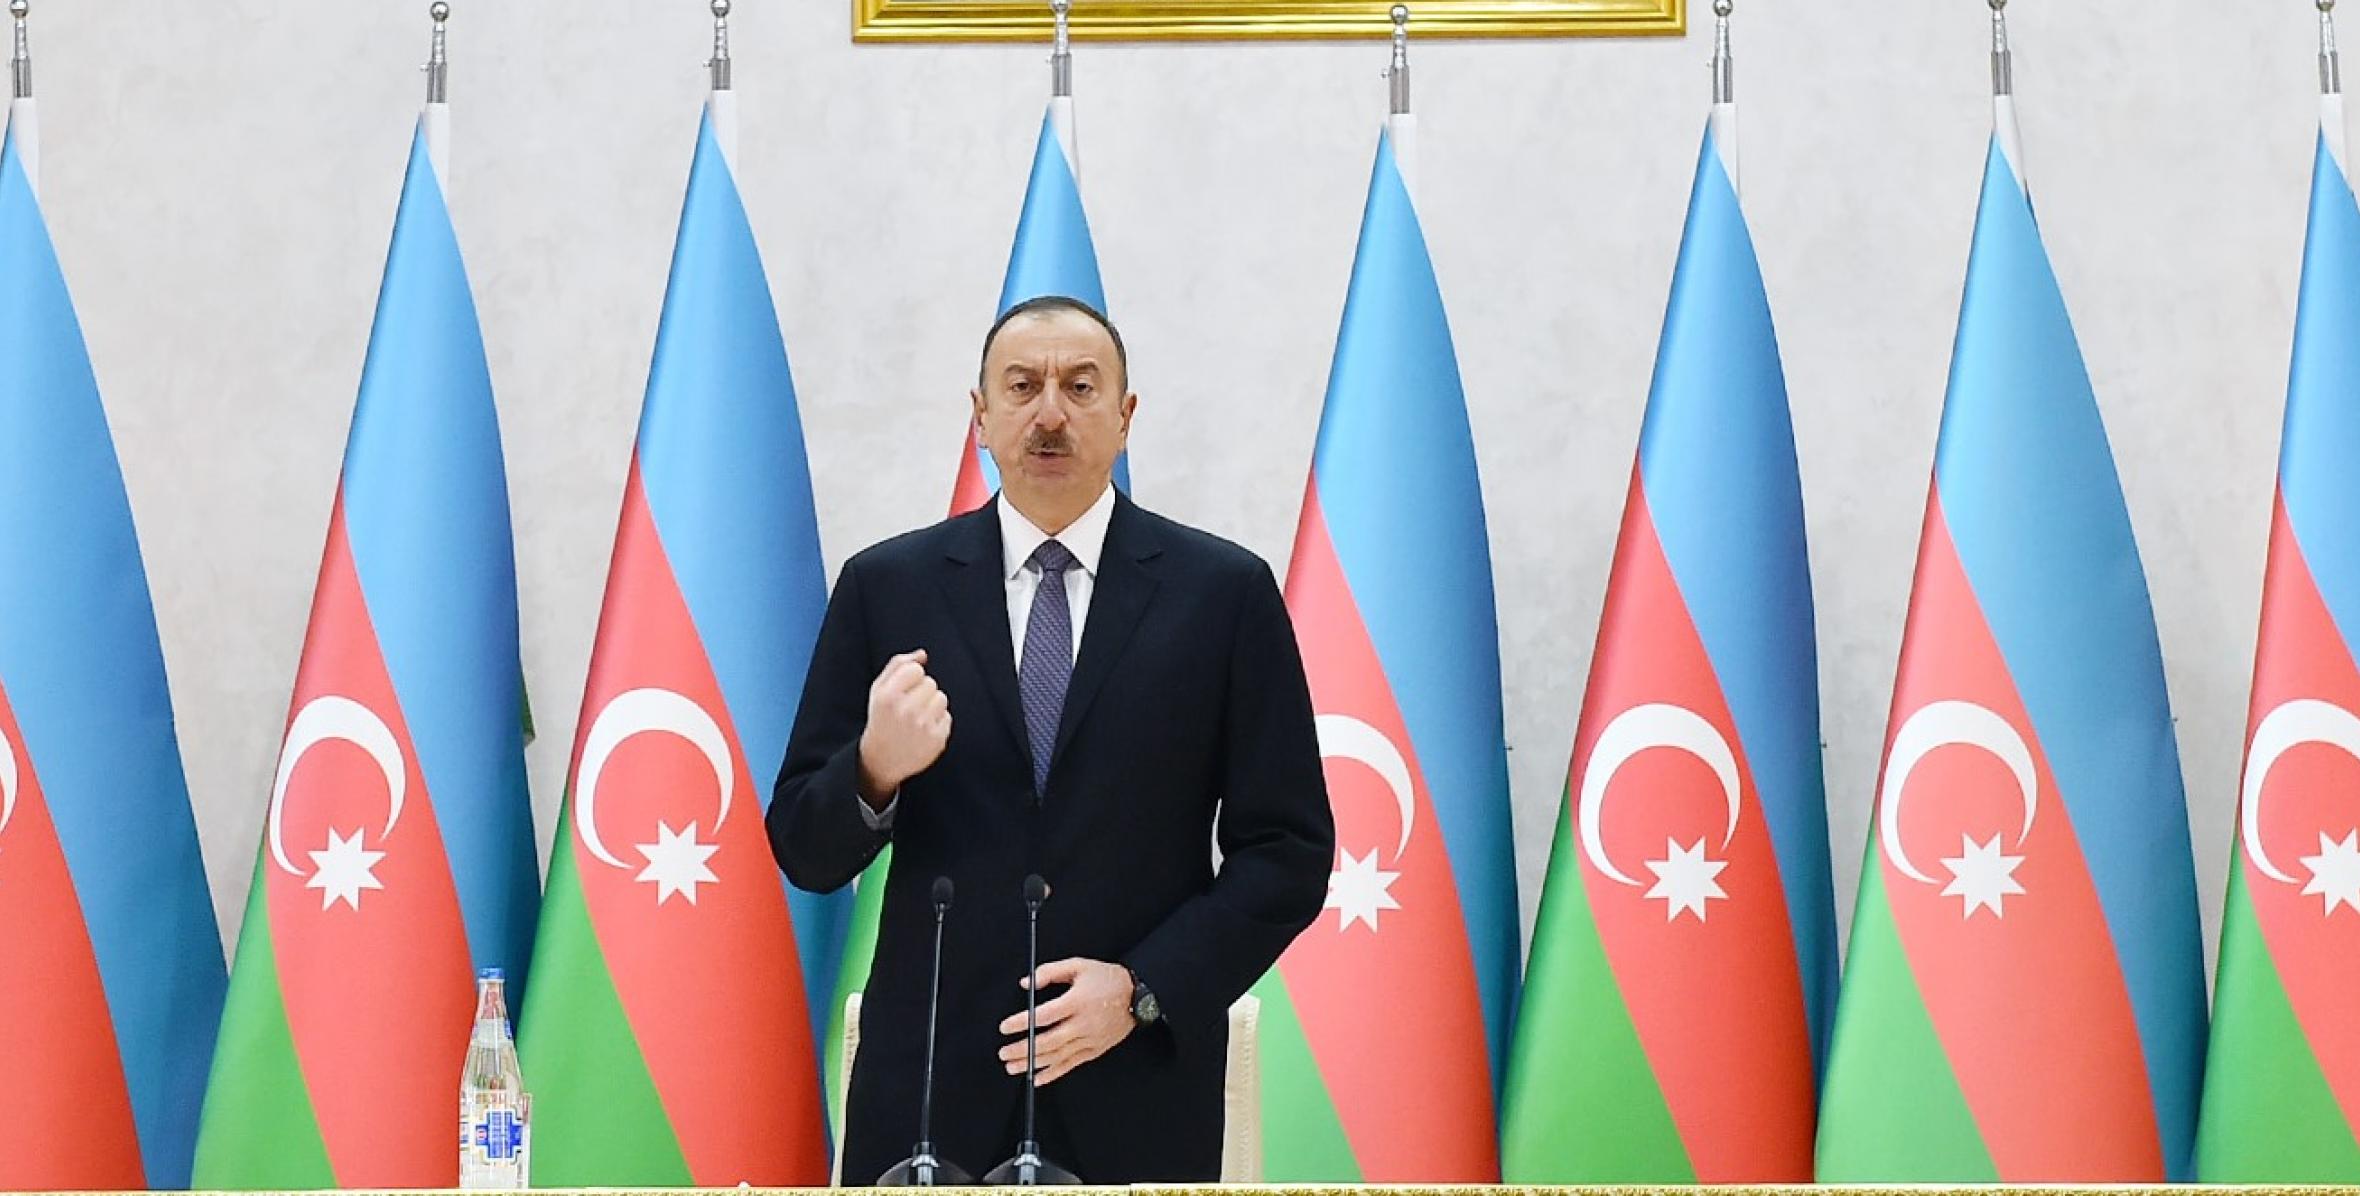 Speech by Ilham Aliyev at the opening of new military camp of Defense Ministry's military unit